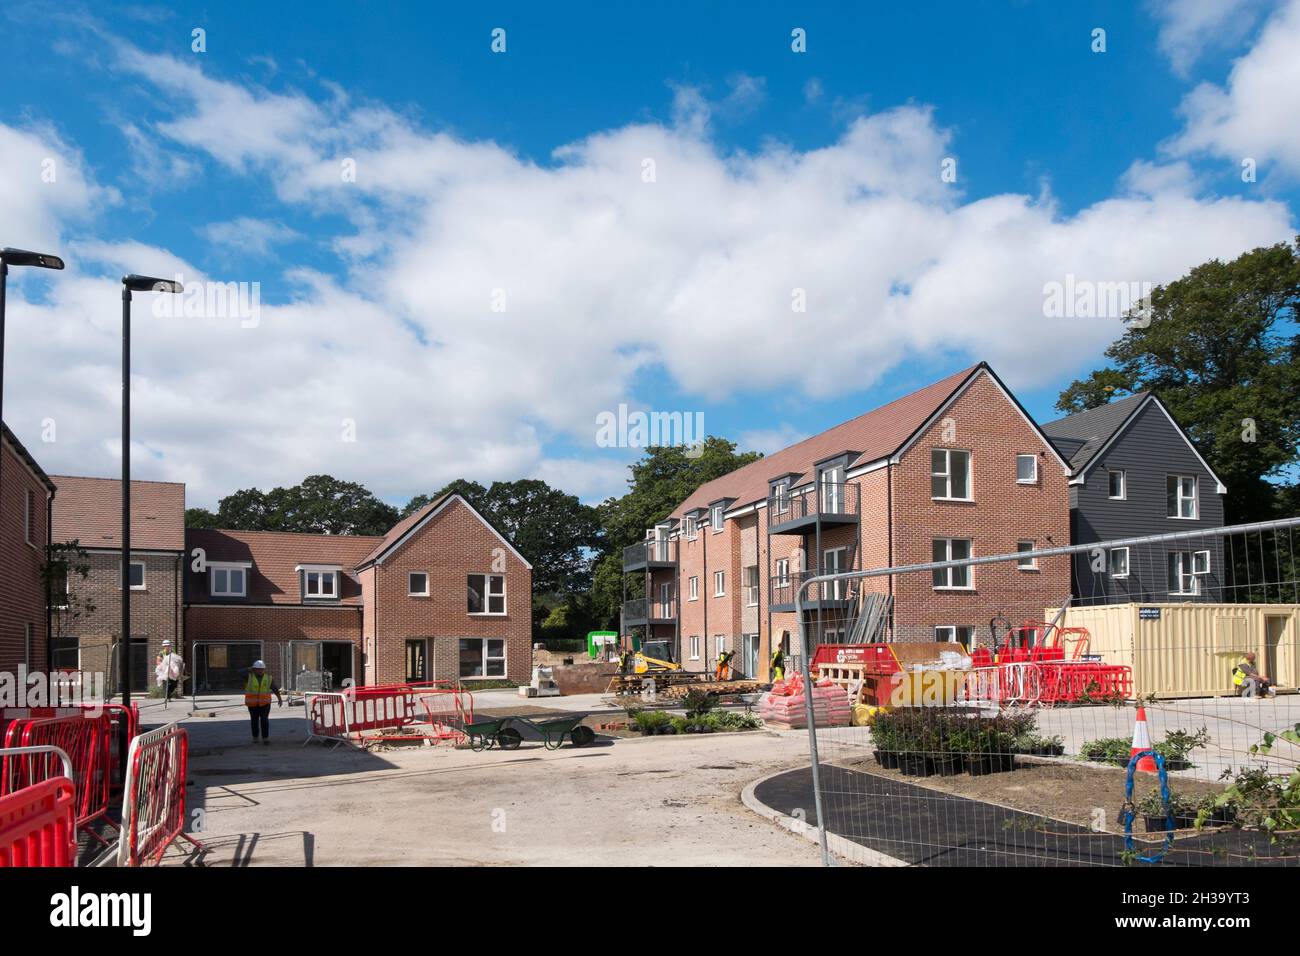 Builders finishing the flats, houses and roads at Keepers Green, the new development in north Chichester, West Sussex, England, UK. Stock Photo